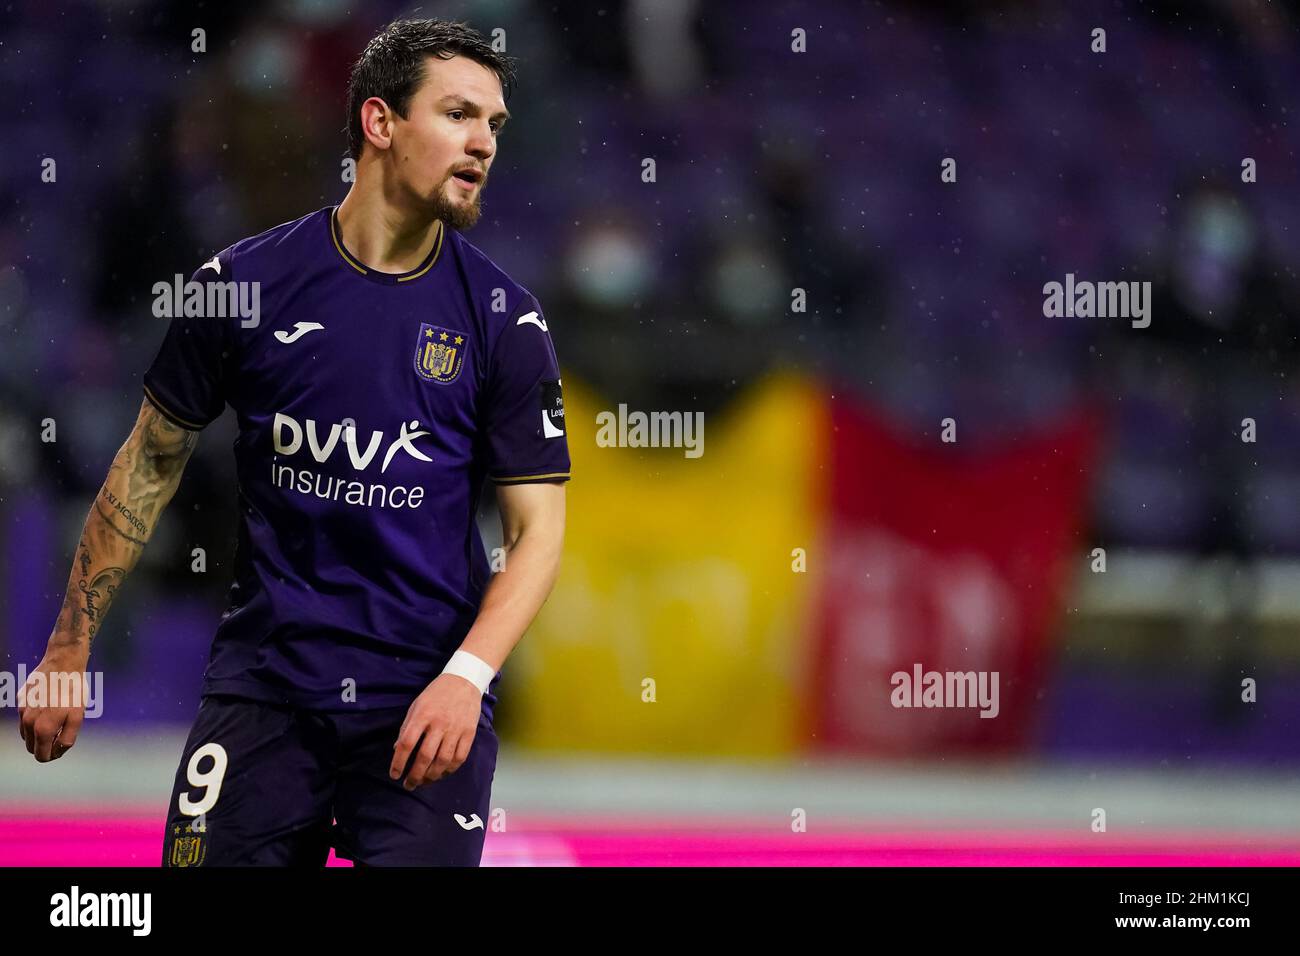 Benito Raman moves to RSC Anderlecht with immediate effect - FC Schalke 04